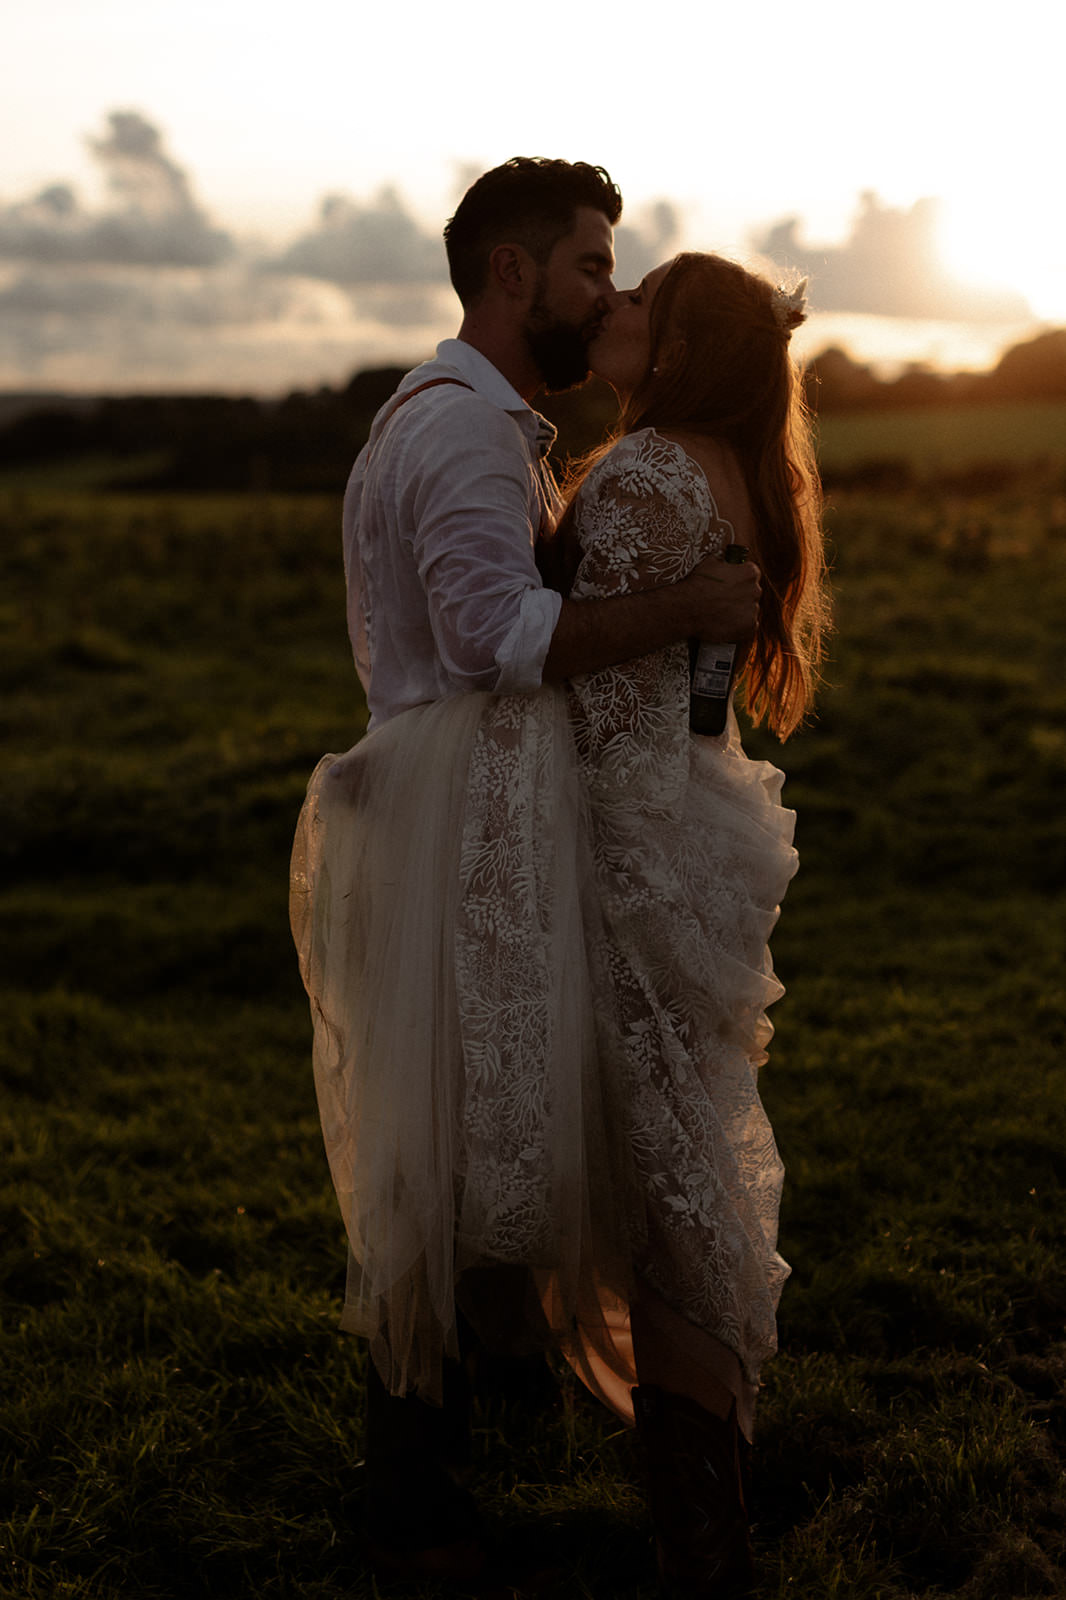 Wales Wedding Photography | couple on their wedding day at sunset